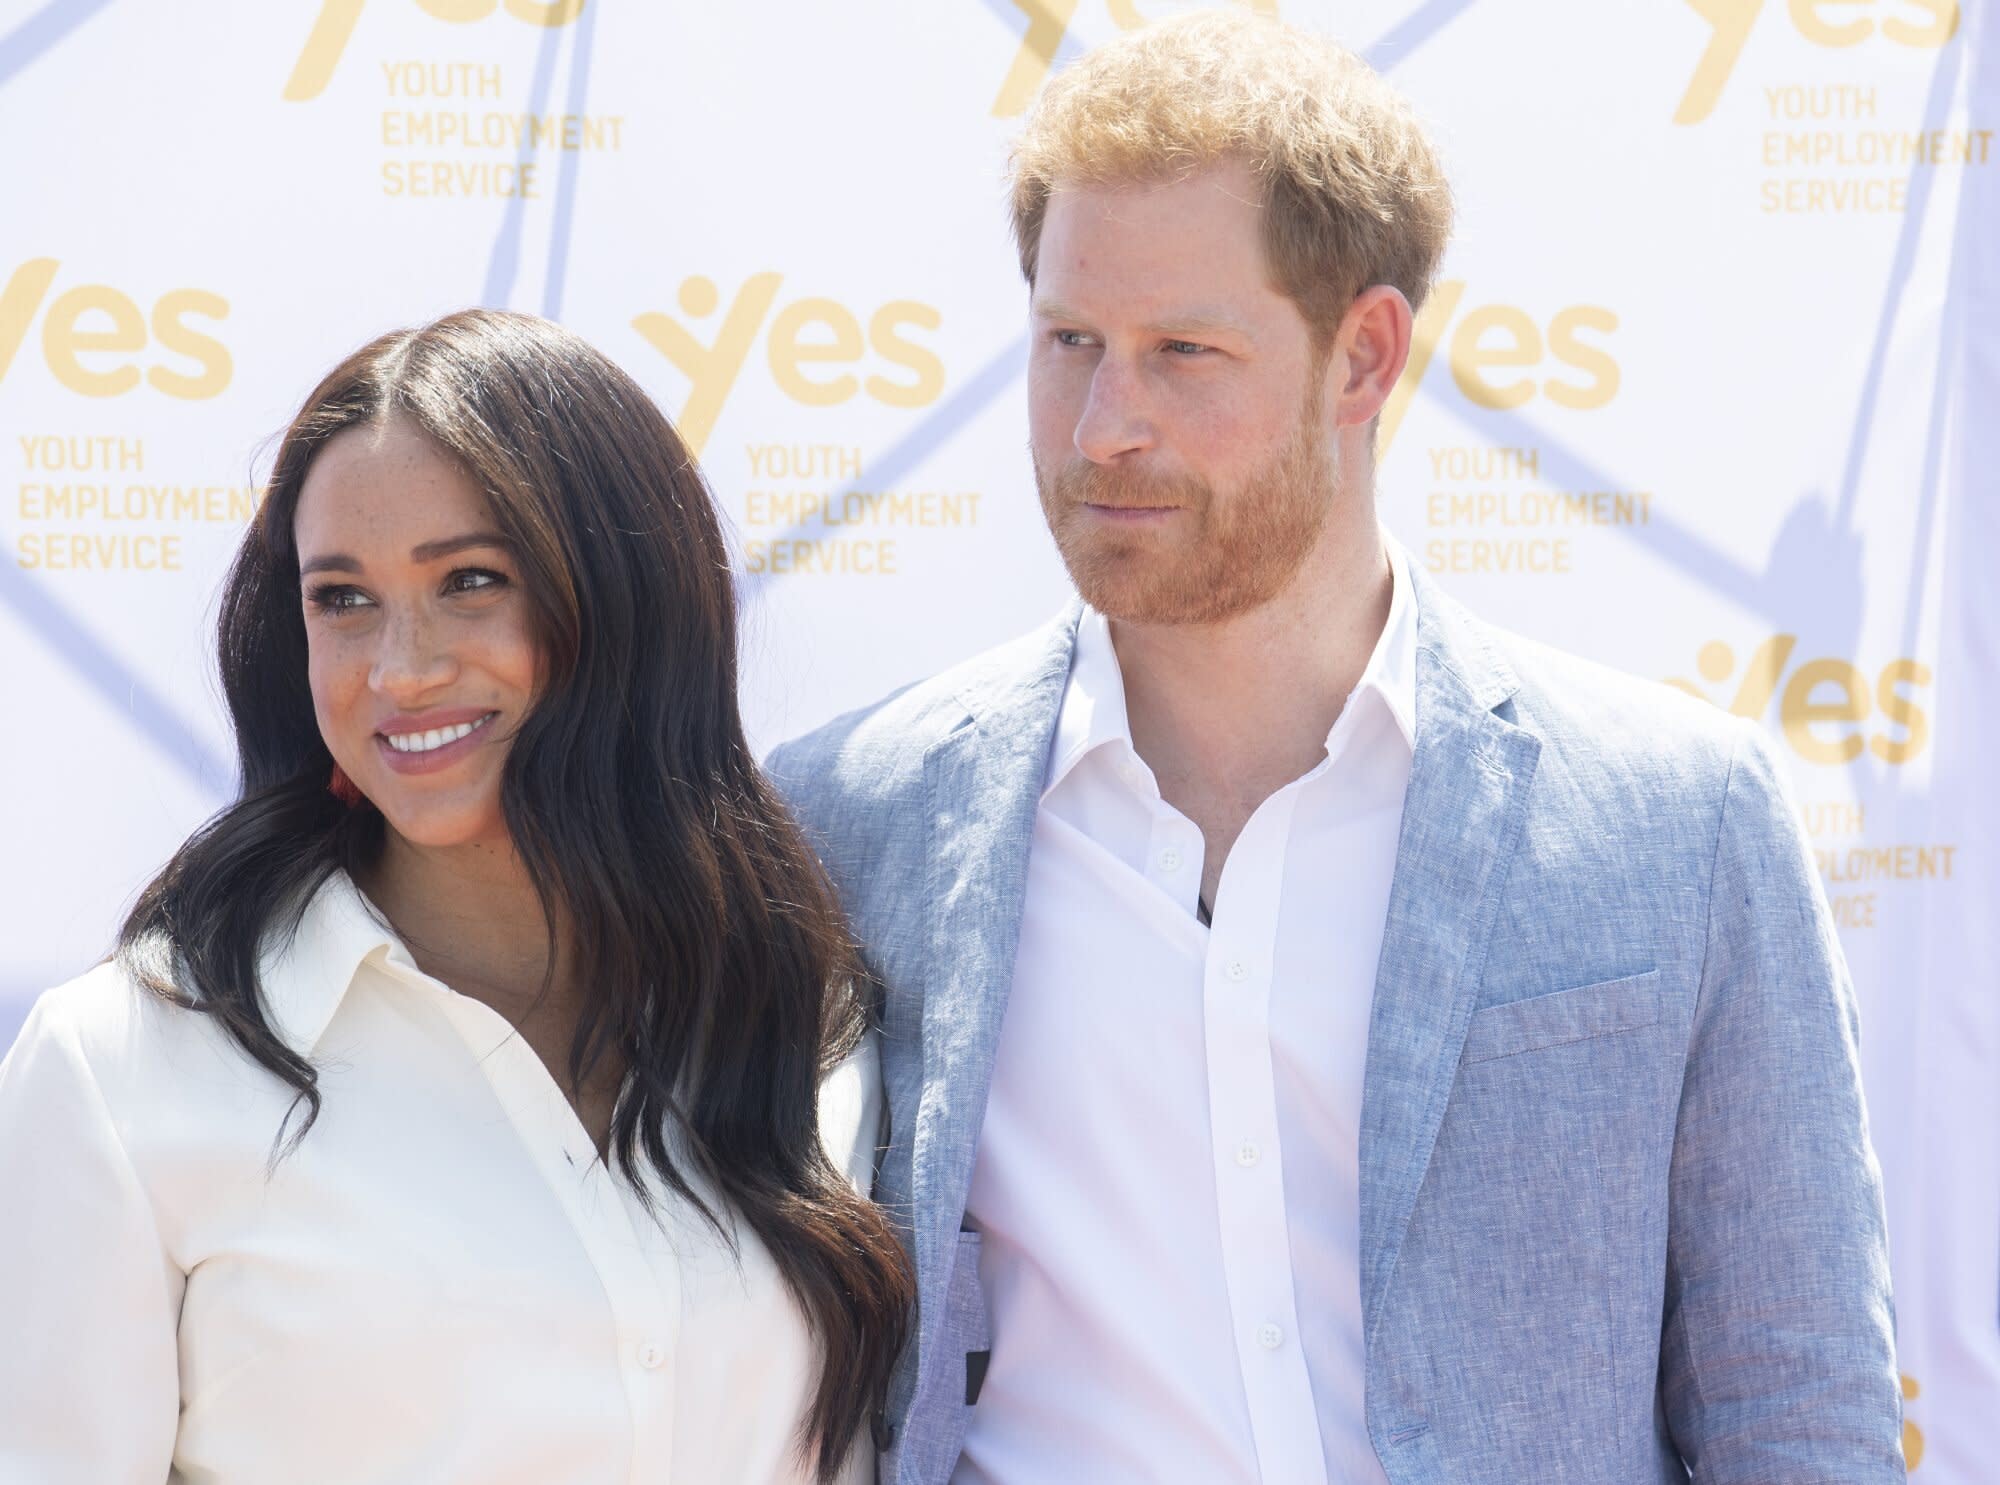 Meghan Markle And Prince Harry Hope 2021 Can Be A Time Of Healing For Their Family Says Source